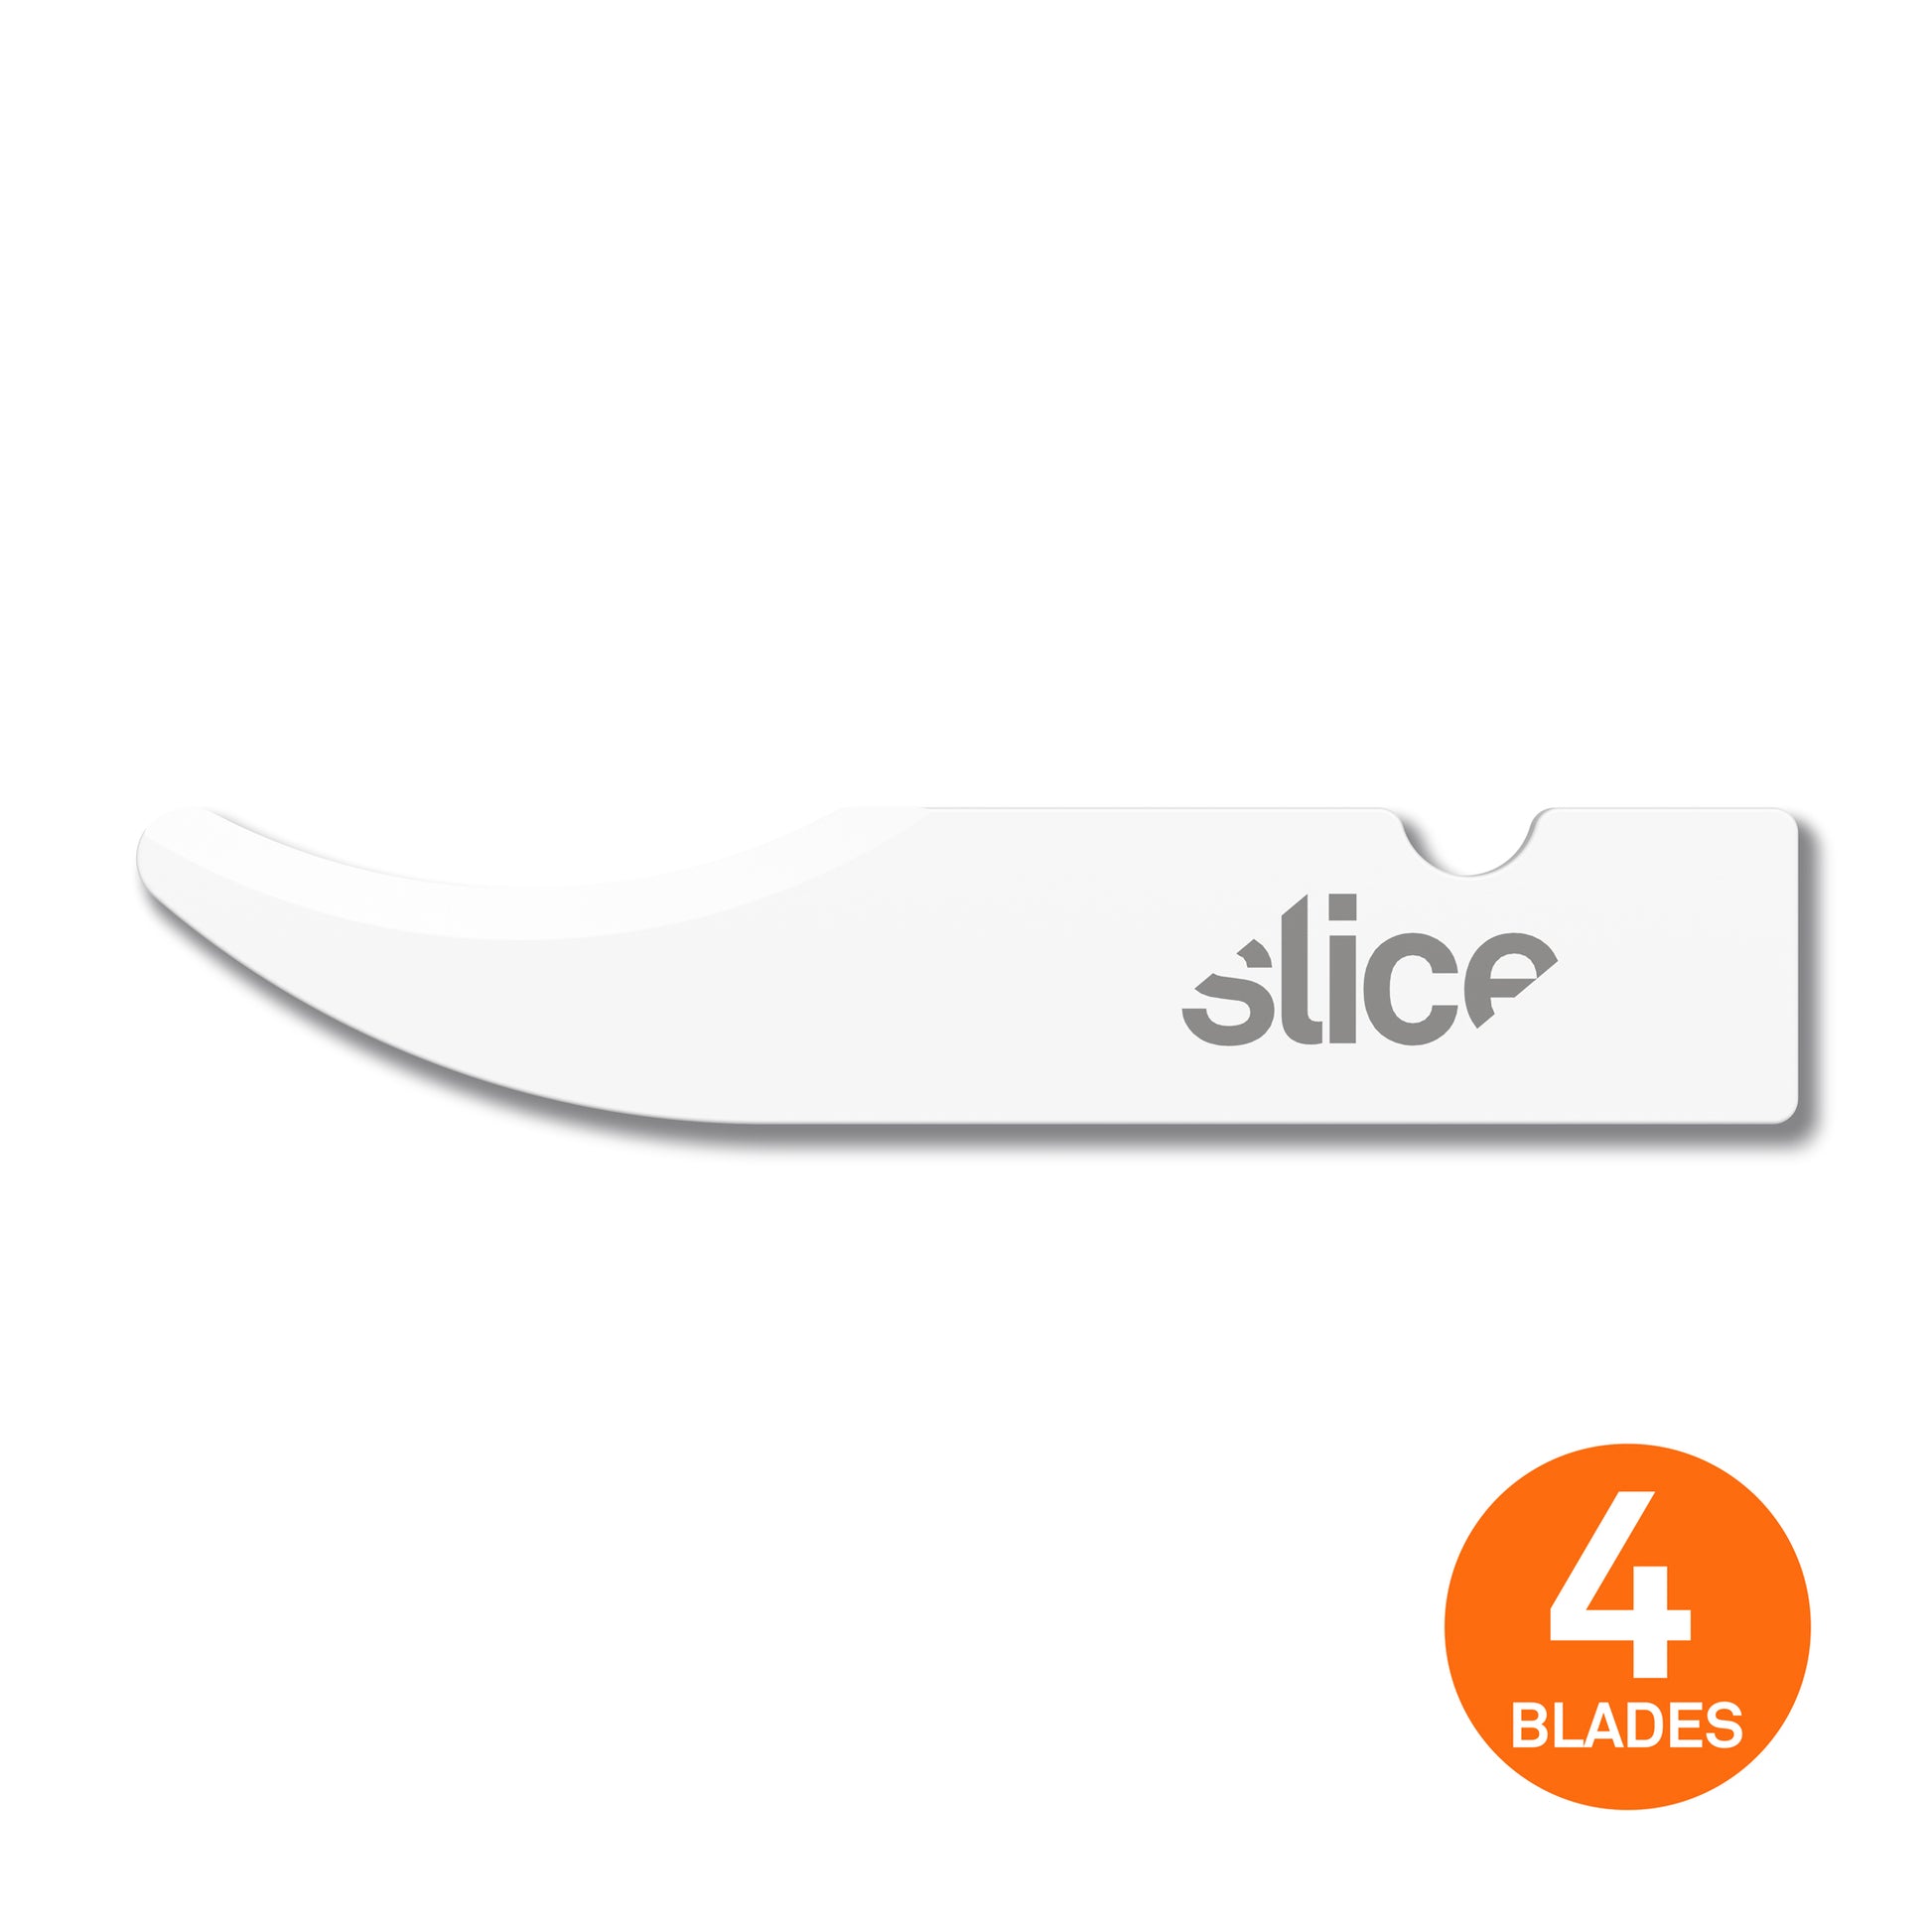 Slice Seam Ripper Blades (Rounded Tip) - DaltonSafety